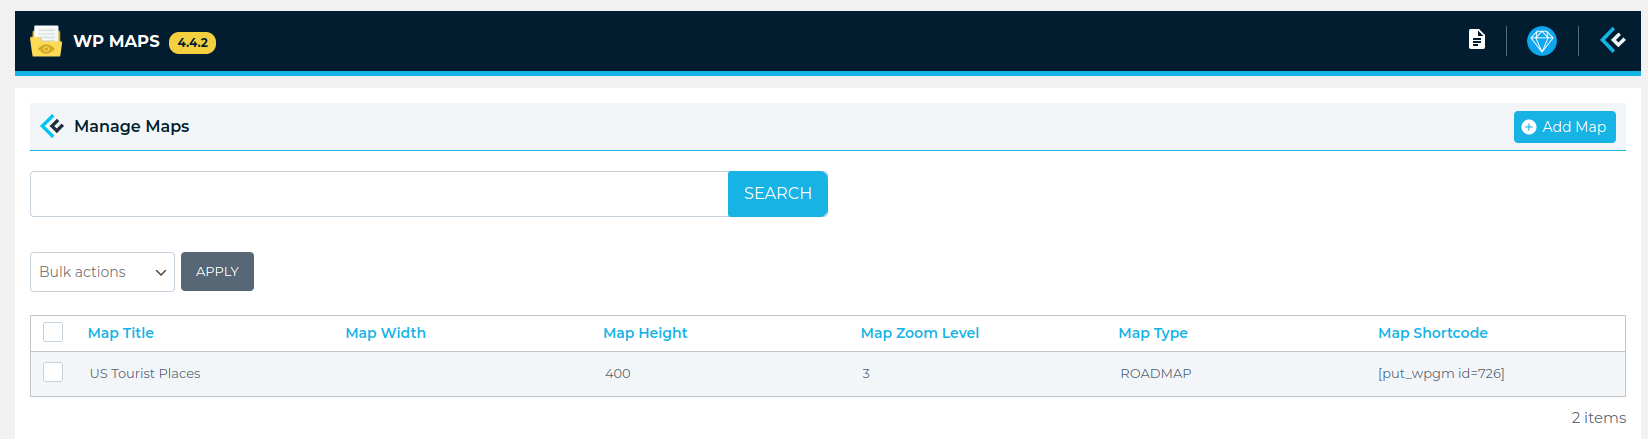 Manage maps page.